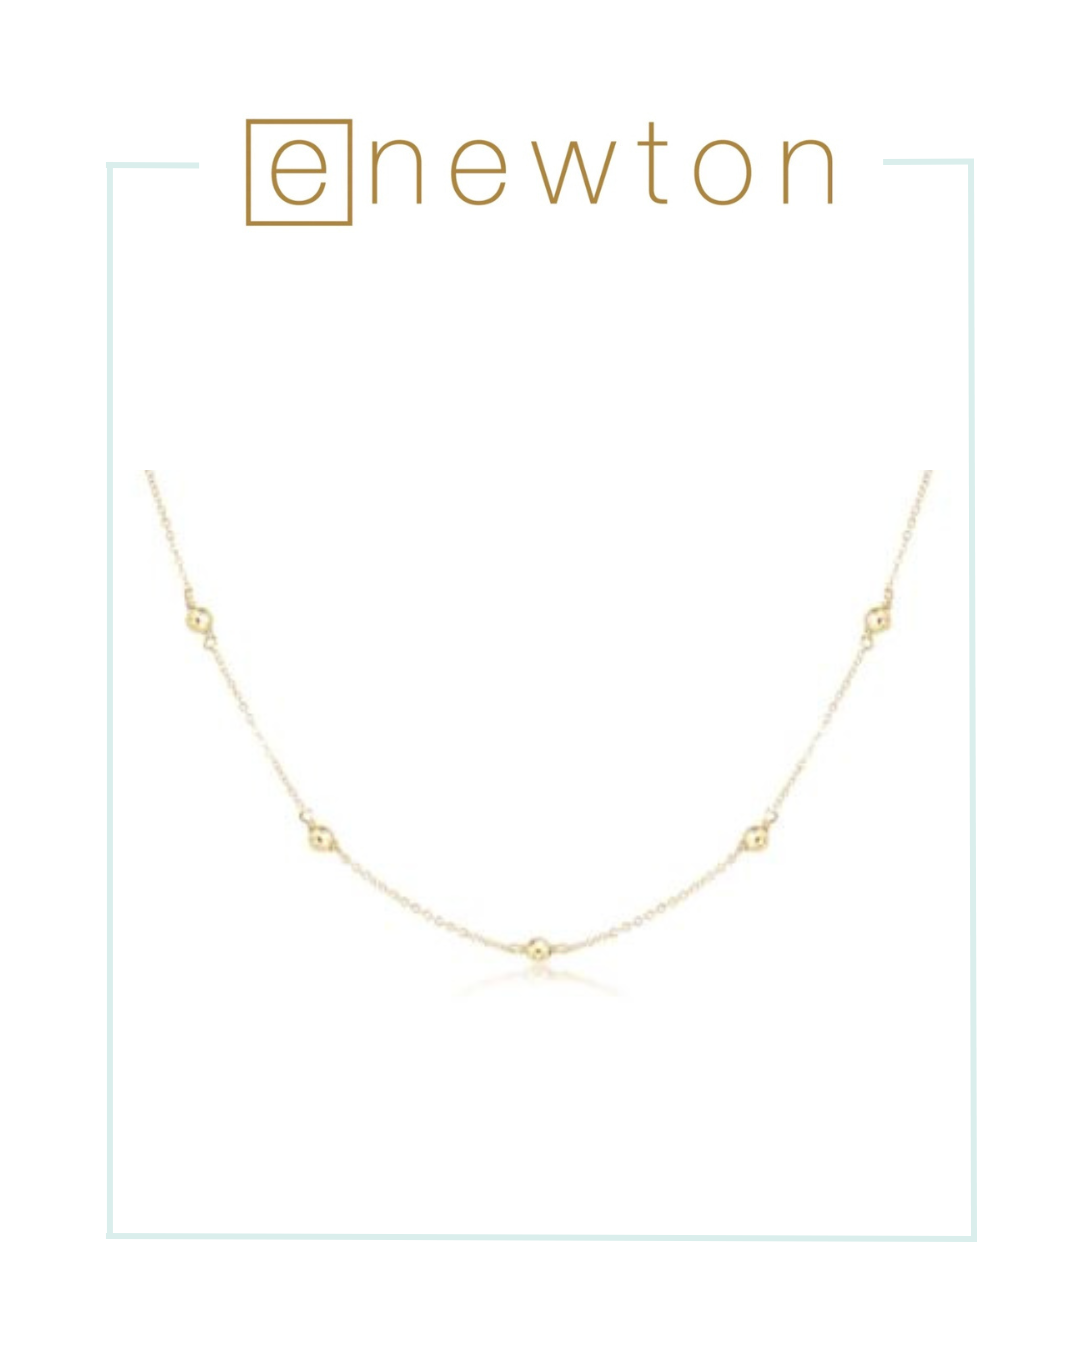 E Newton 15" Choker Simplicity Chain - Classic 4mm Gold-Necklaces-ENEWTON-The Village Shoppe, Women’s Fashion Boutique, Shop Online and In Store - Located in Muscle Shoals, AL.